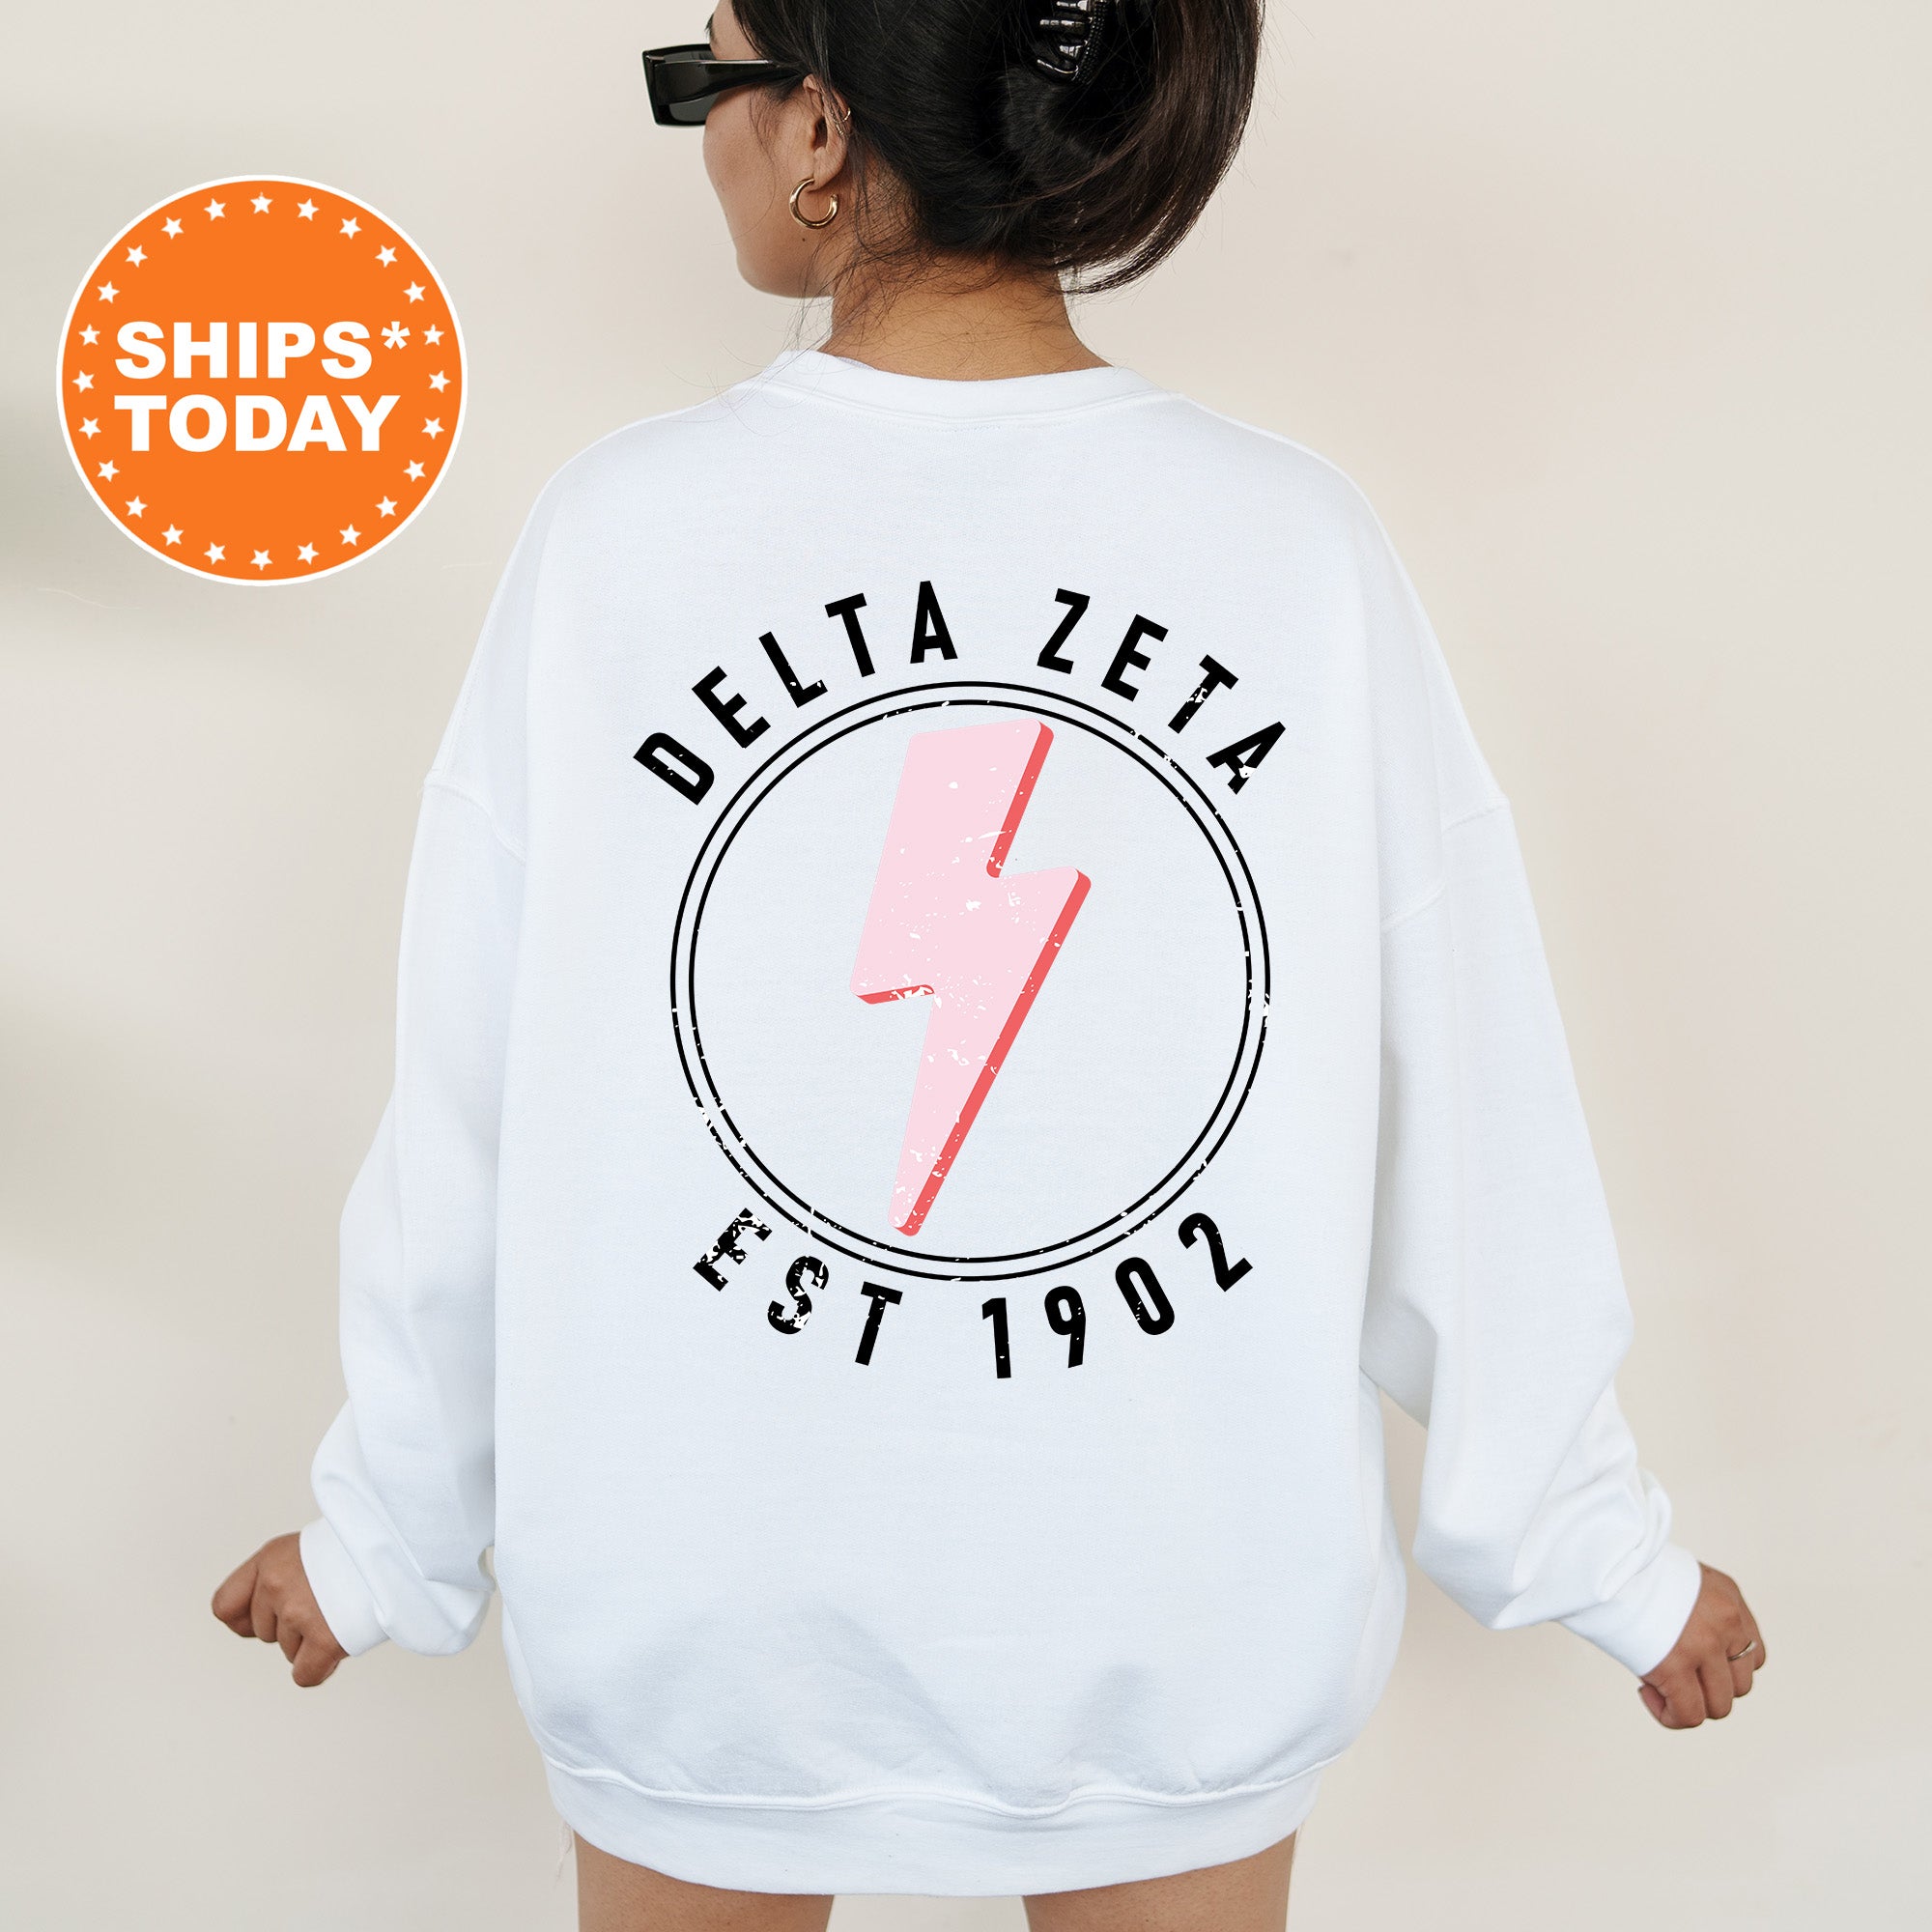 a woman wearing a white sweatshirt with a pink lightning bolt on it